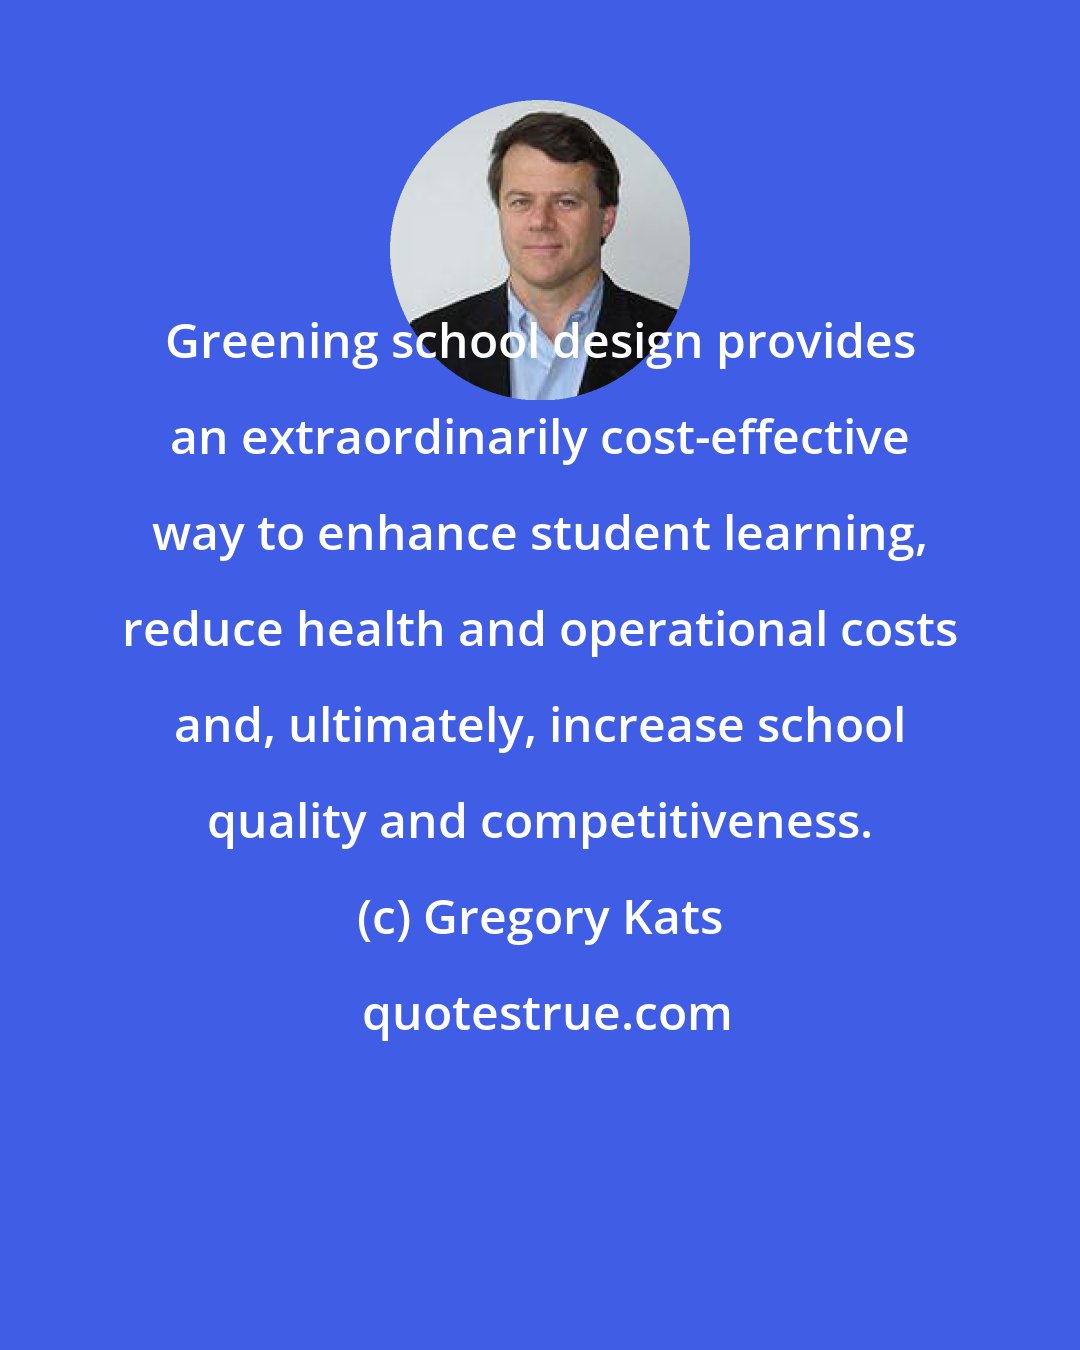 Gregory Kats: Greening school design provides an extraordinarily cost-effective way to enhance student learning, reduce health and operational costs and, ultimately, increase school quality and competitiveness.